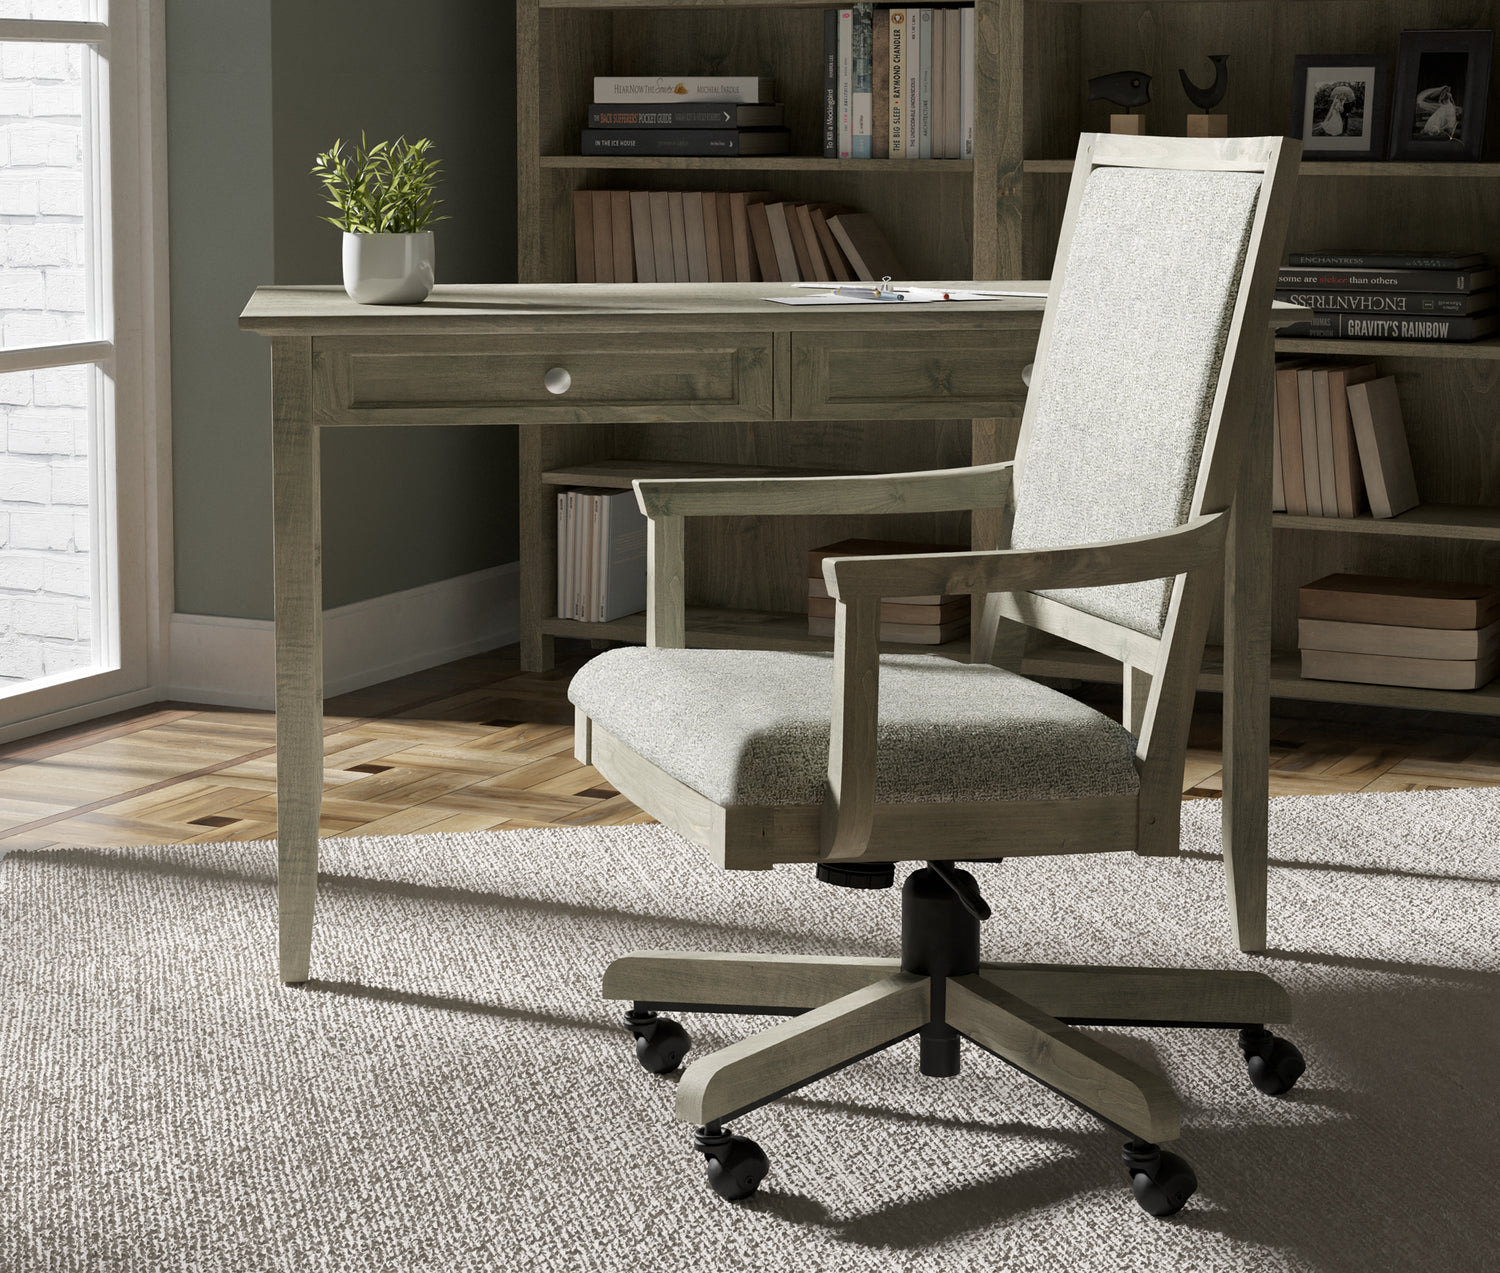 Origins by Stickley office chair, desk, and bookcase